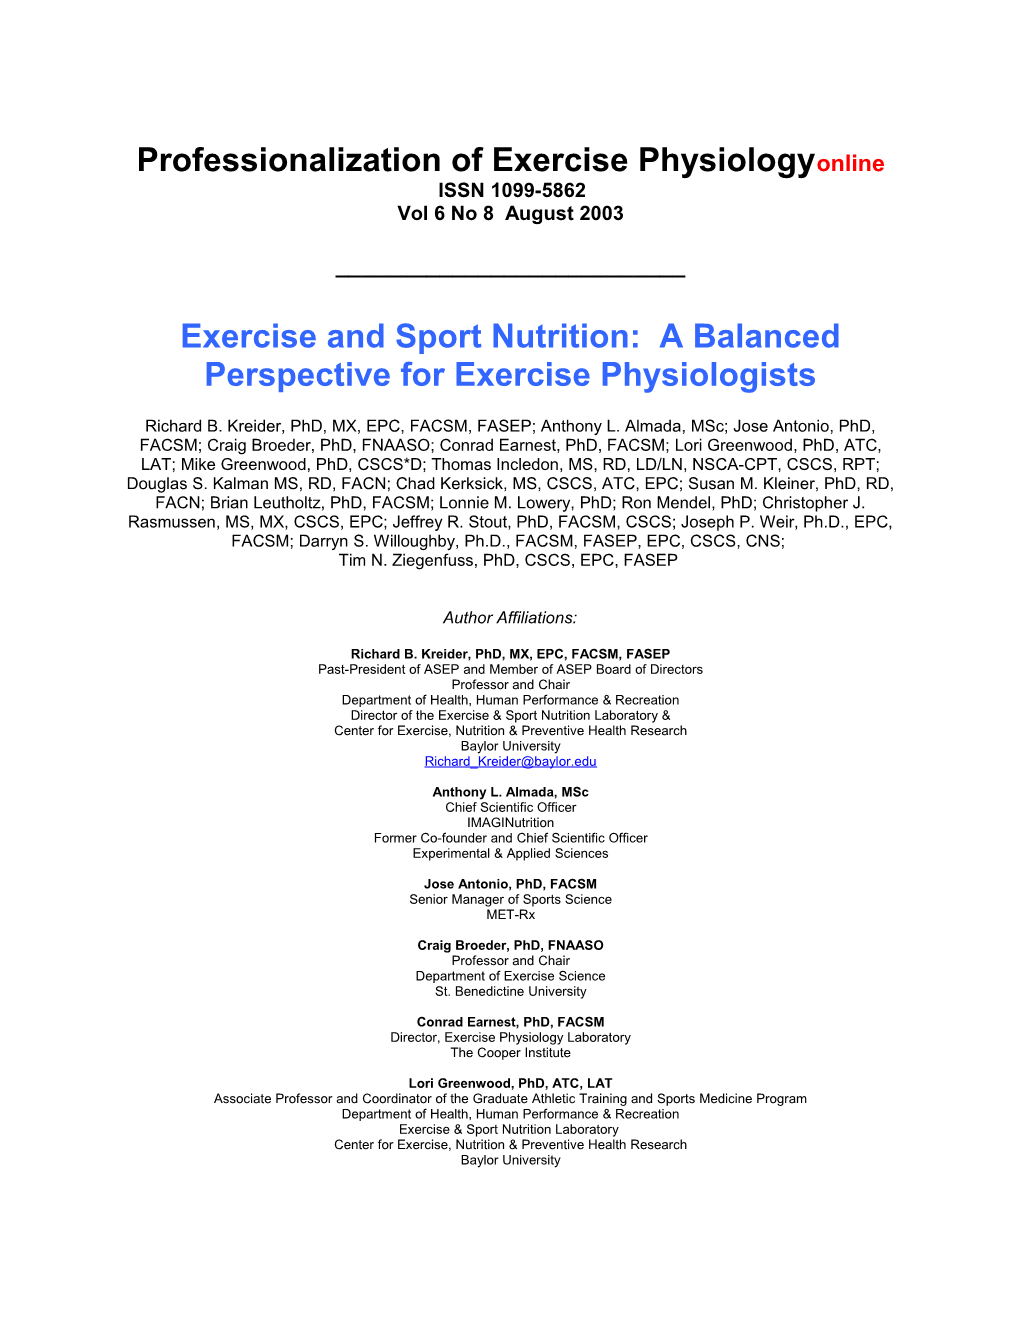 Exercise and Sport Nutrition: a Balanced Perspective for Exercise Physiologists